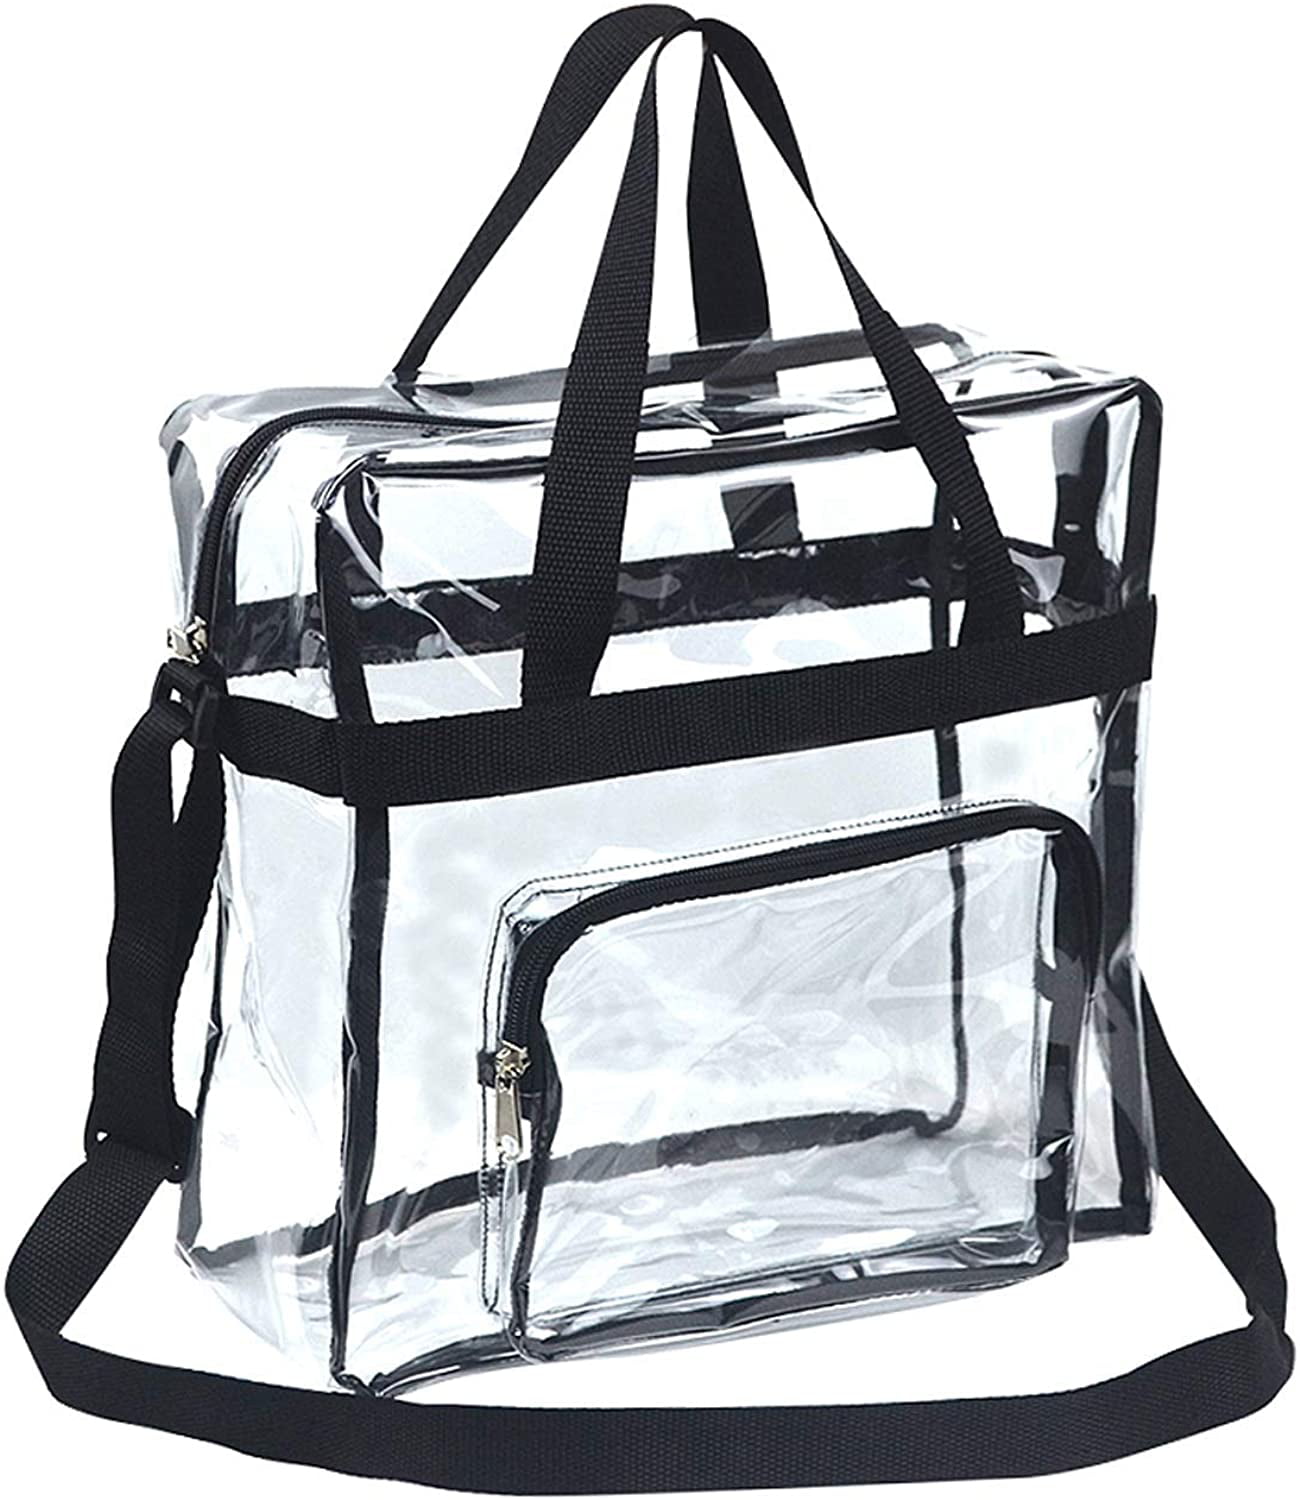  JOTONOXEN Clear Tote Bag Stadium Approved, Adjustable Shoulder  Strap and Zippered Top, Stadium Security Travel & Gym Clear Bag, Perfect  for Sports Games, Work, School and Concerts-12 x12 x6 (Black) 